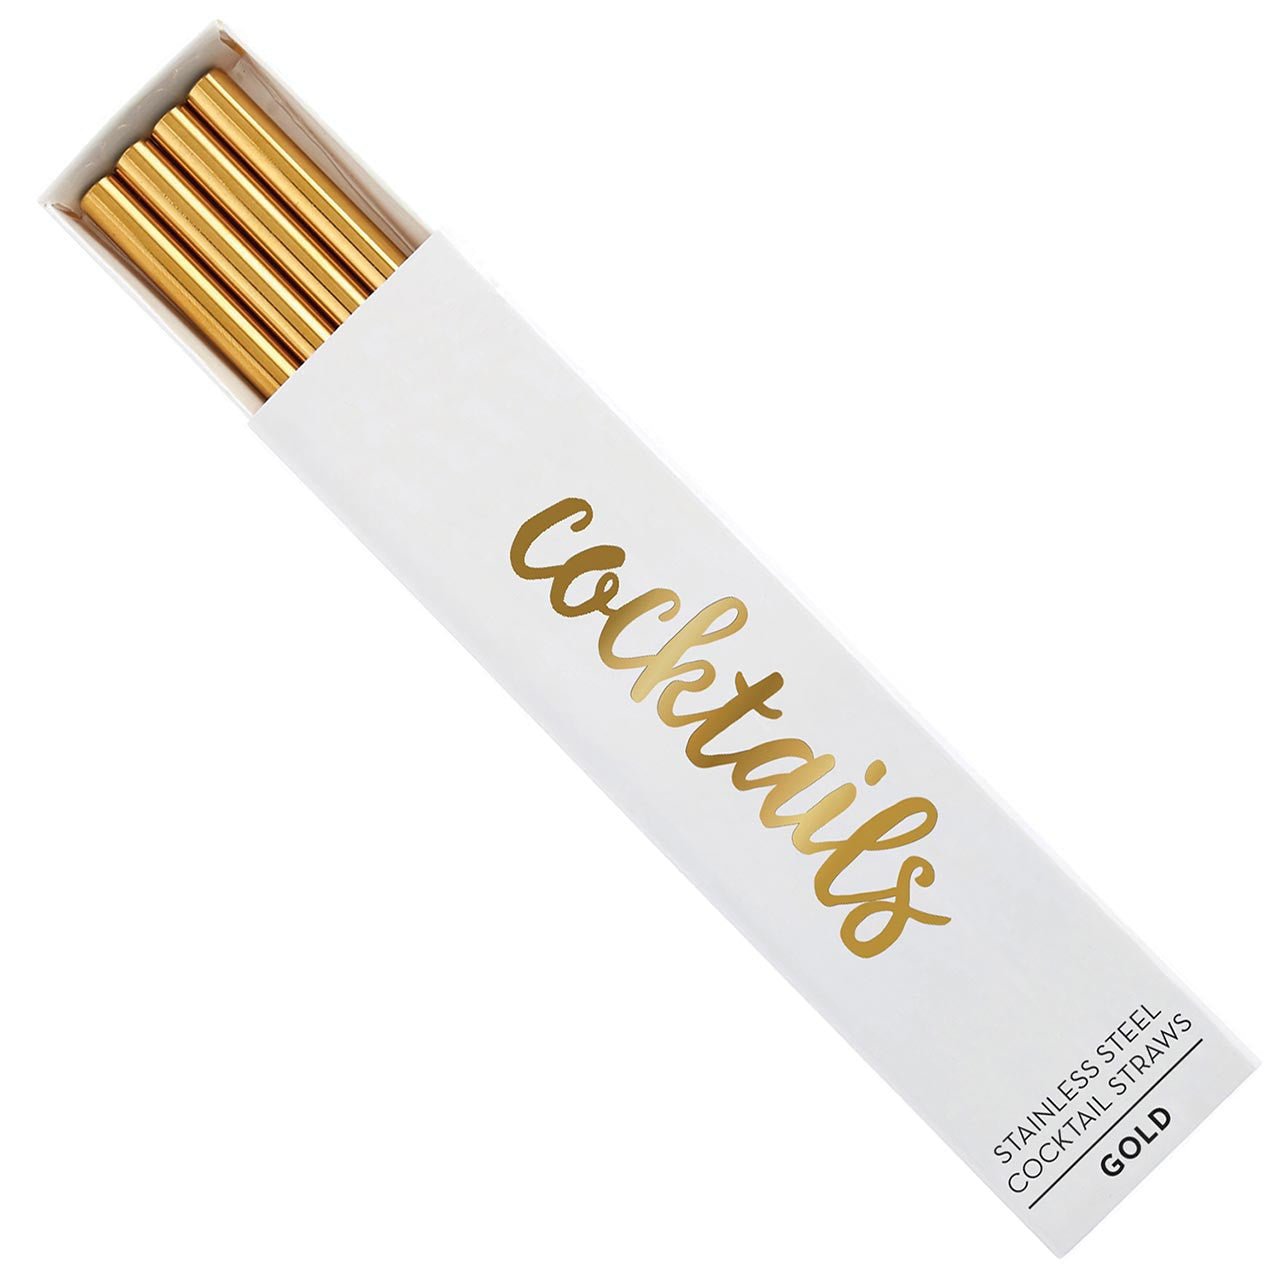 5" Mini Stainless Steel Cocktail Straws in Gold | Set of 4